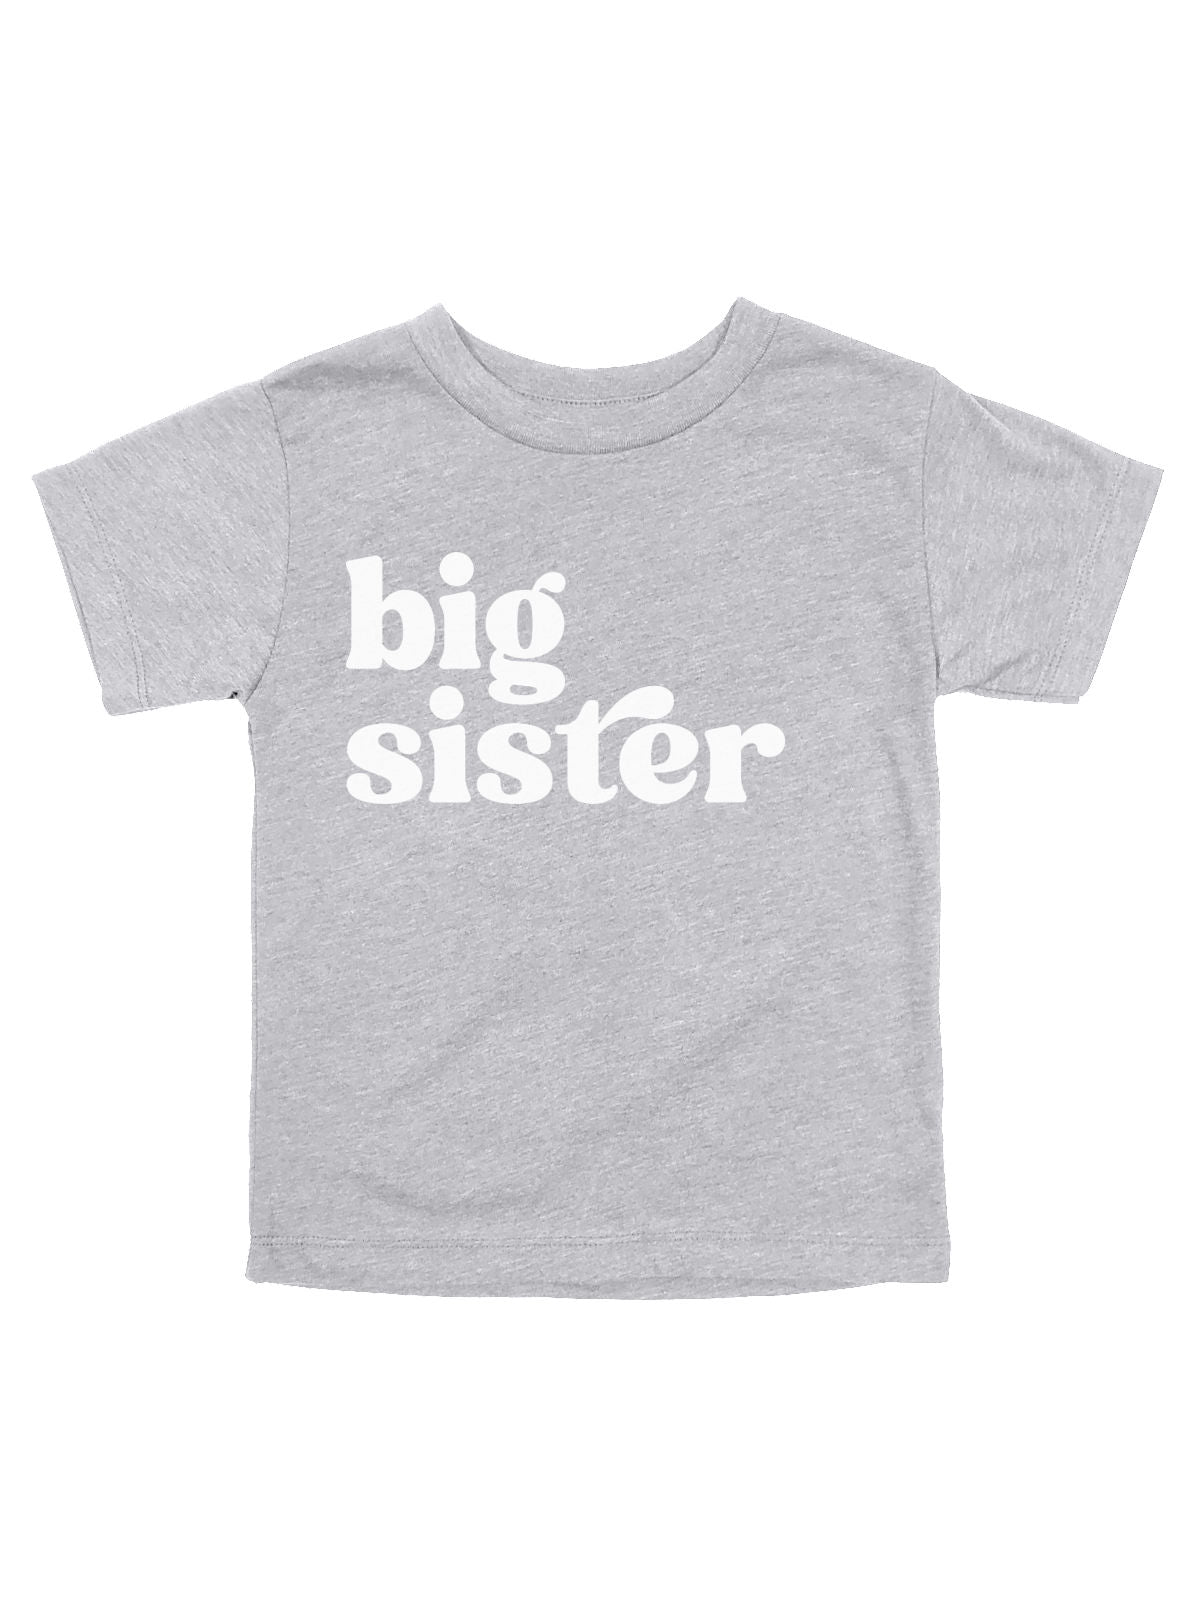 Big Sister Shirt for Girls in Heather Gray